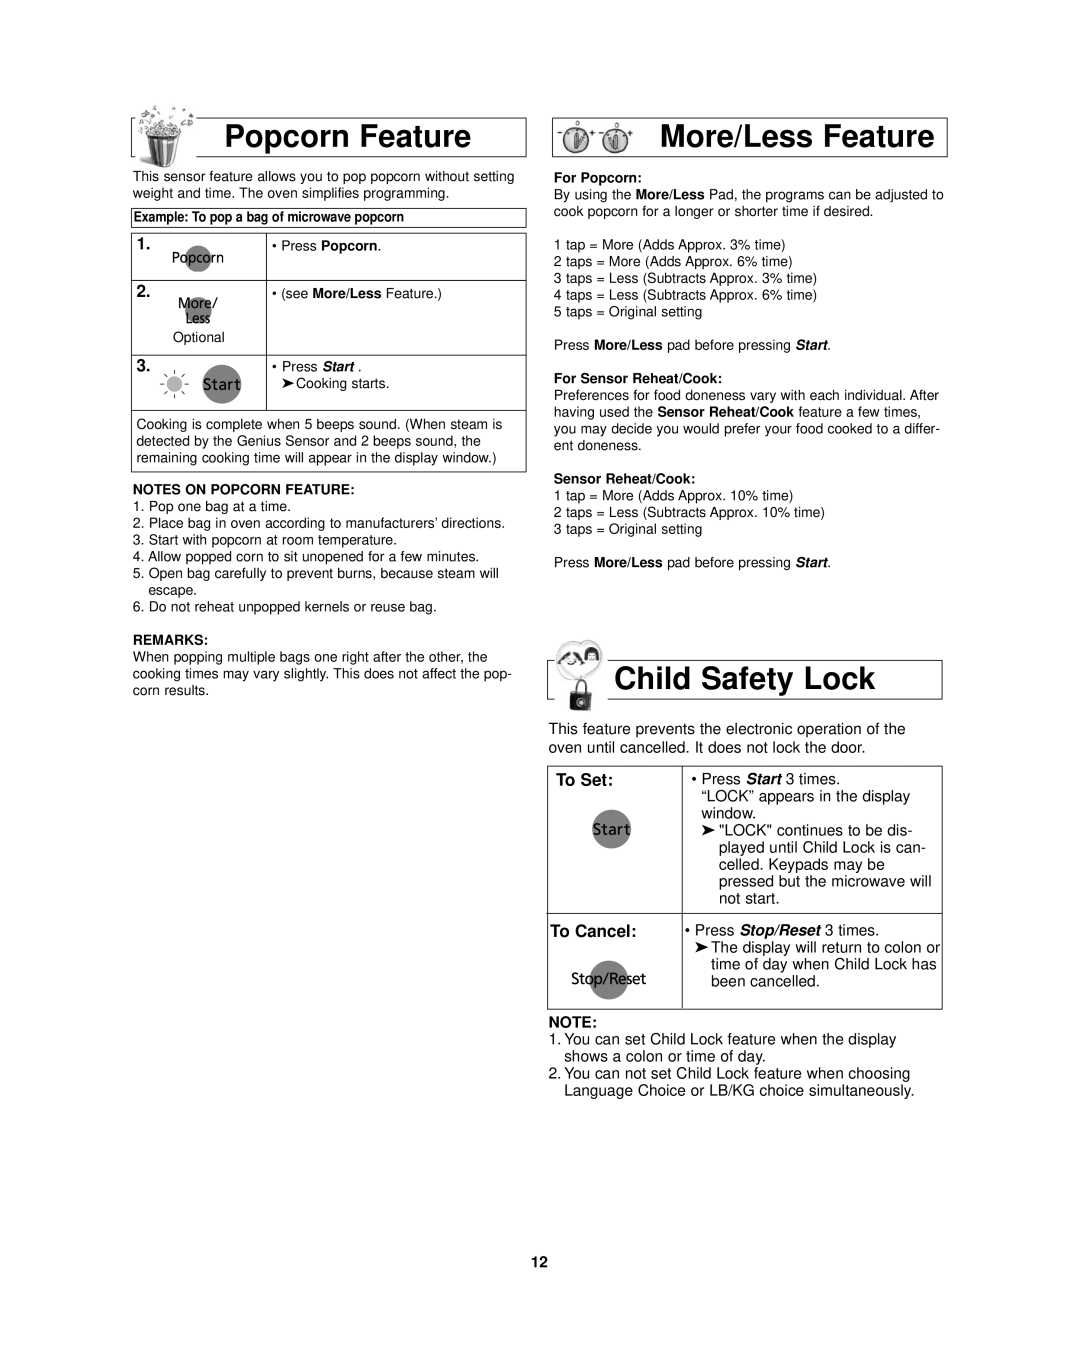 Panasonic NN-SD297SR important safety instructions Popcorn Feature, More/Less Feature, Child Safety Lock, To Set, To Cancel 